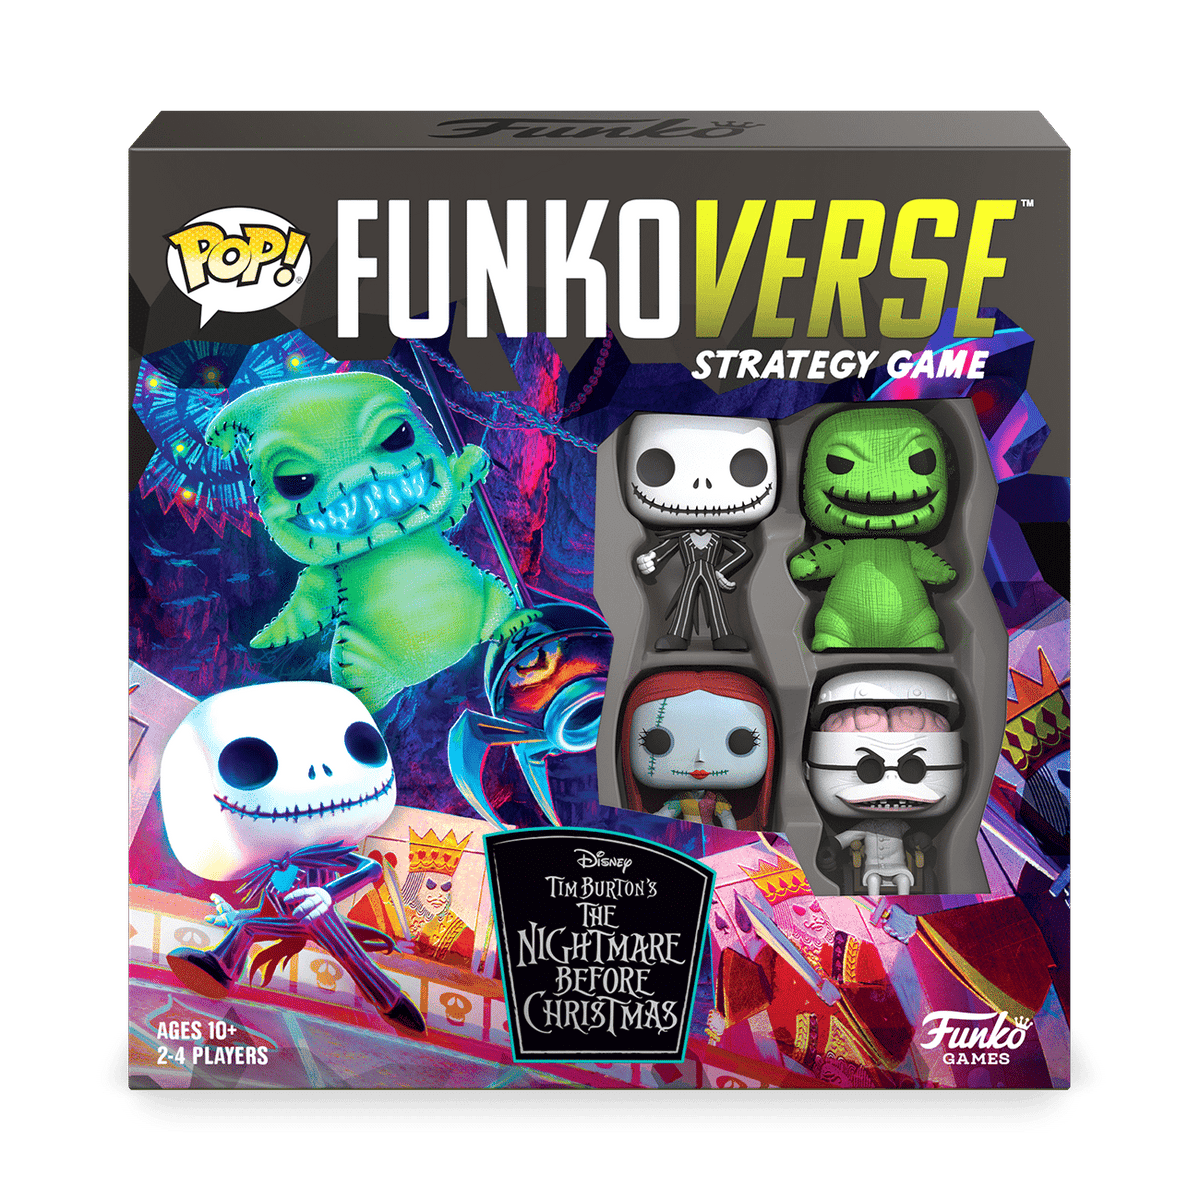 Funkoverse - The Nightmare Before Christmas 100 4 - Pack